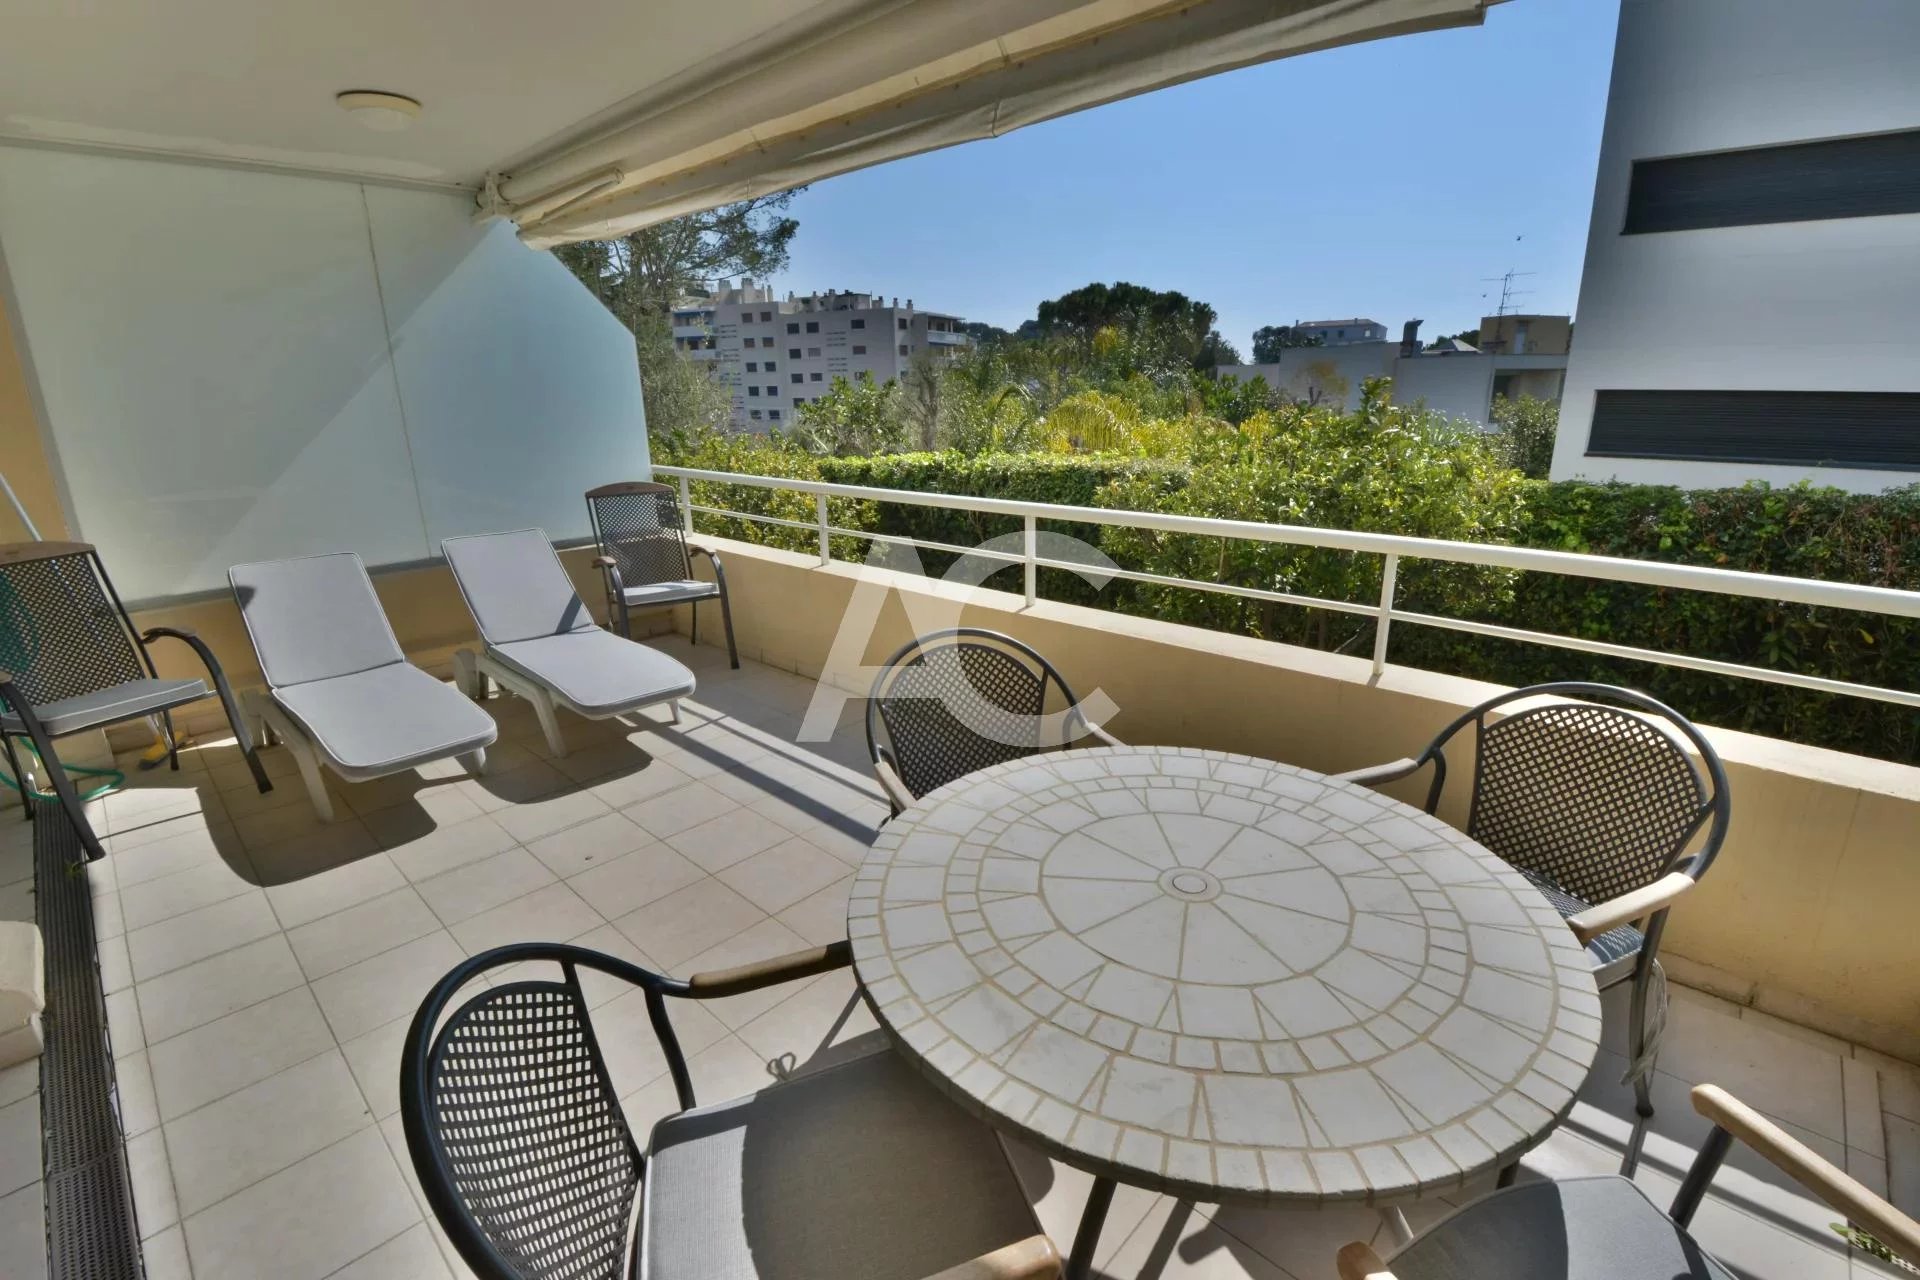 SOLE AGENT - 2 bedroom apartment - Luxury residence - Close to the beach